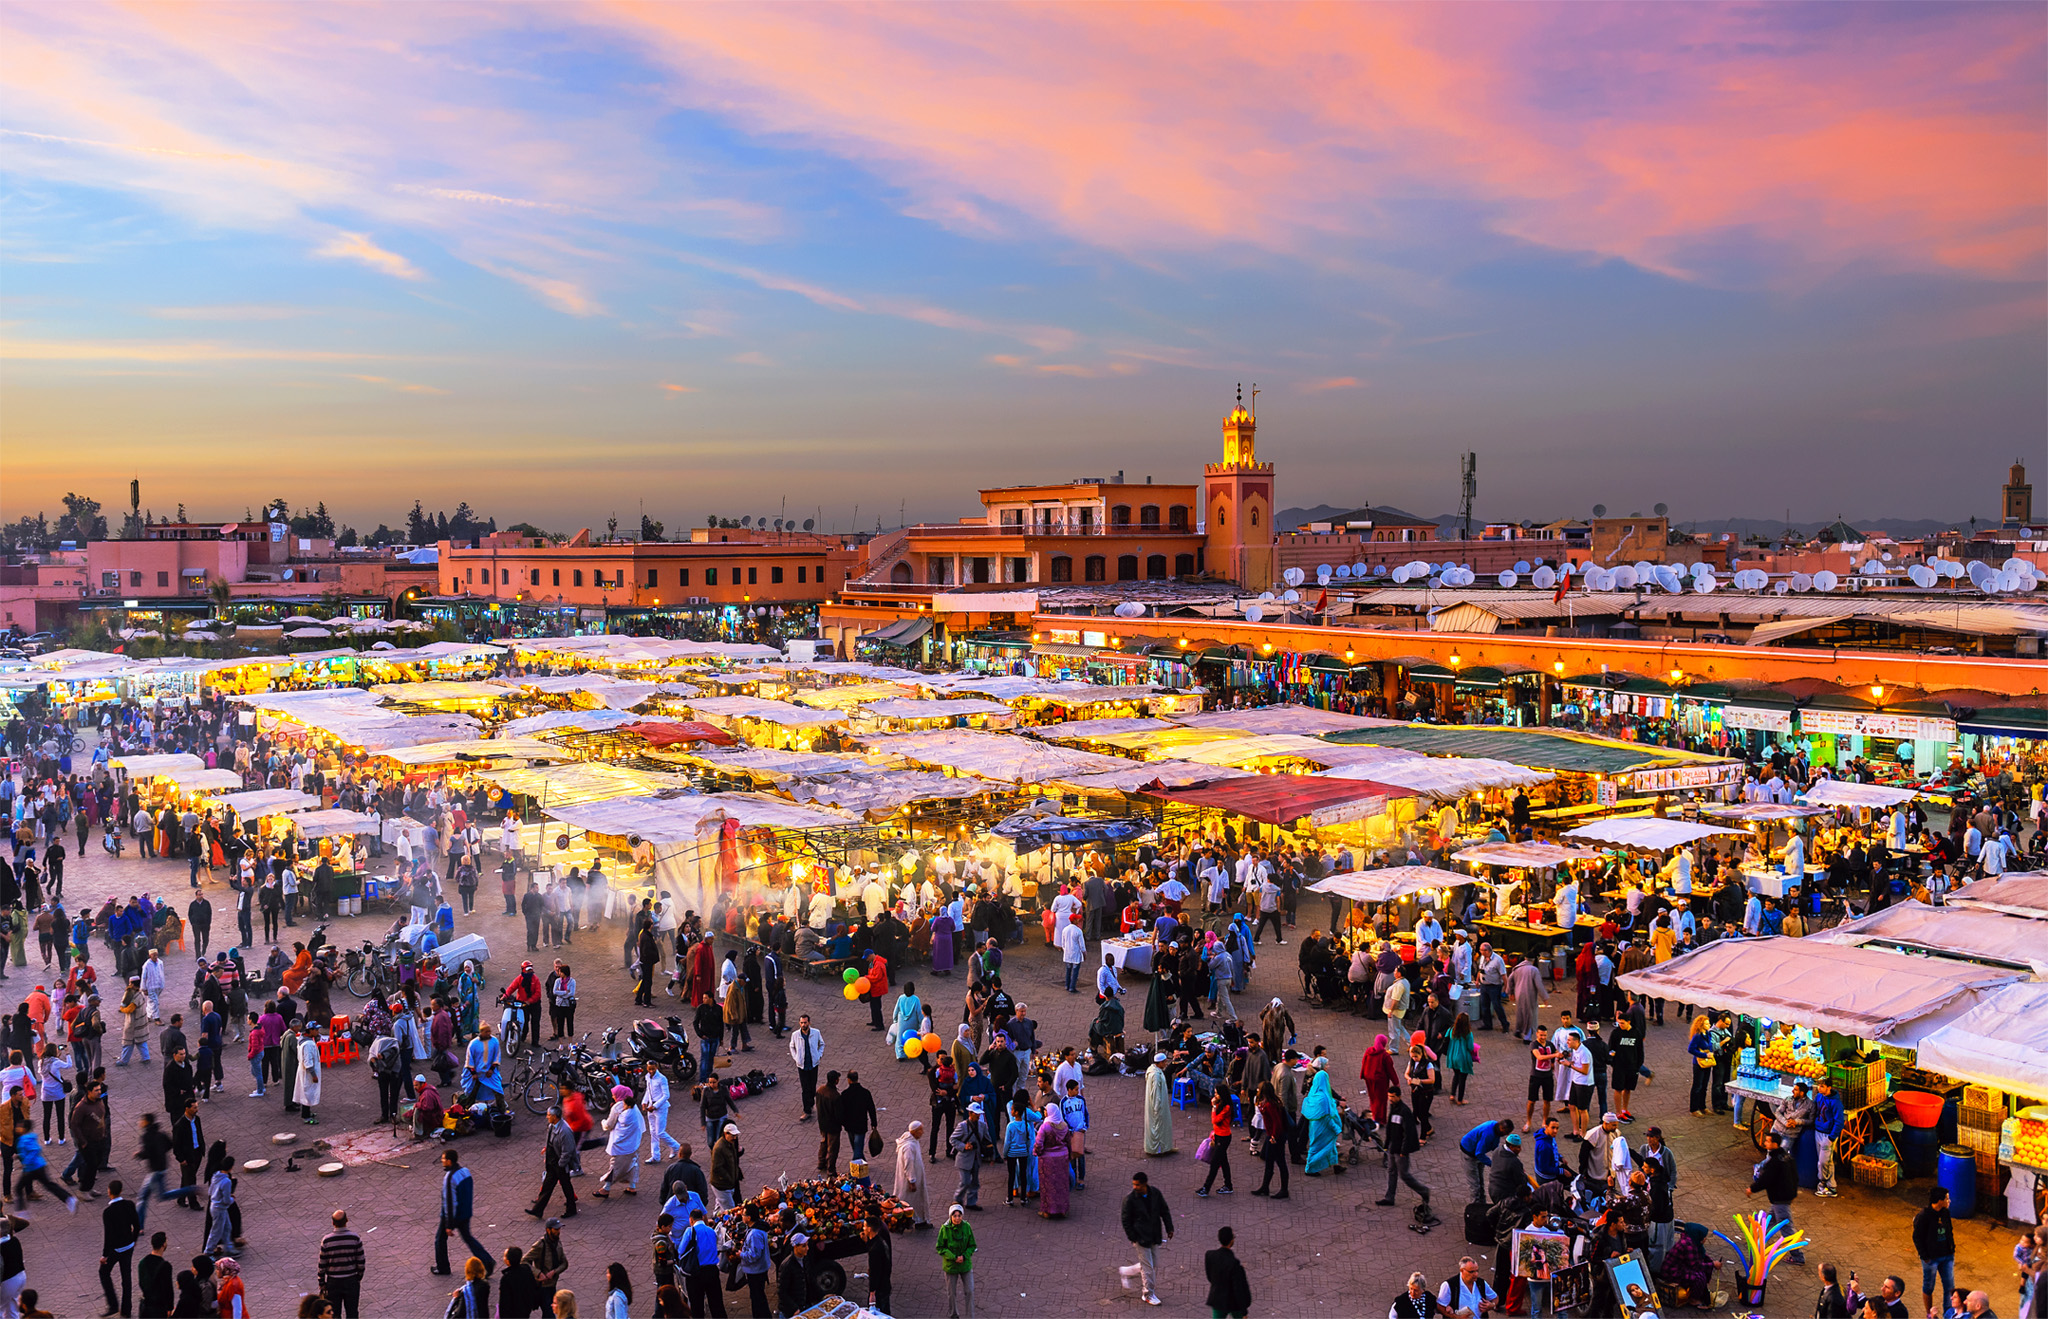 t Night market Jemaa el-Fna Marrakech Welcome to Morocco Reasons to Love - photo 4